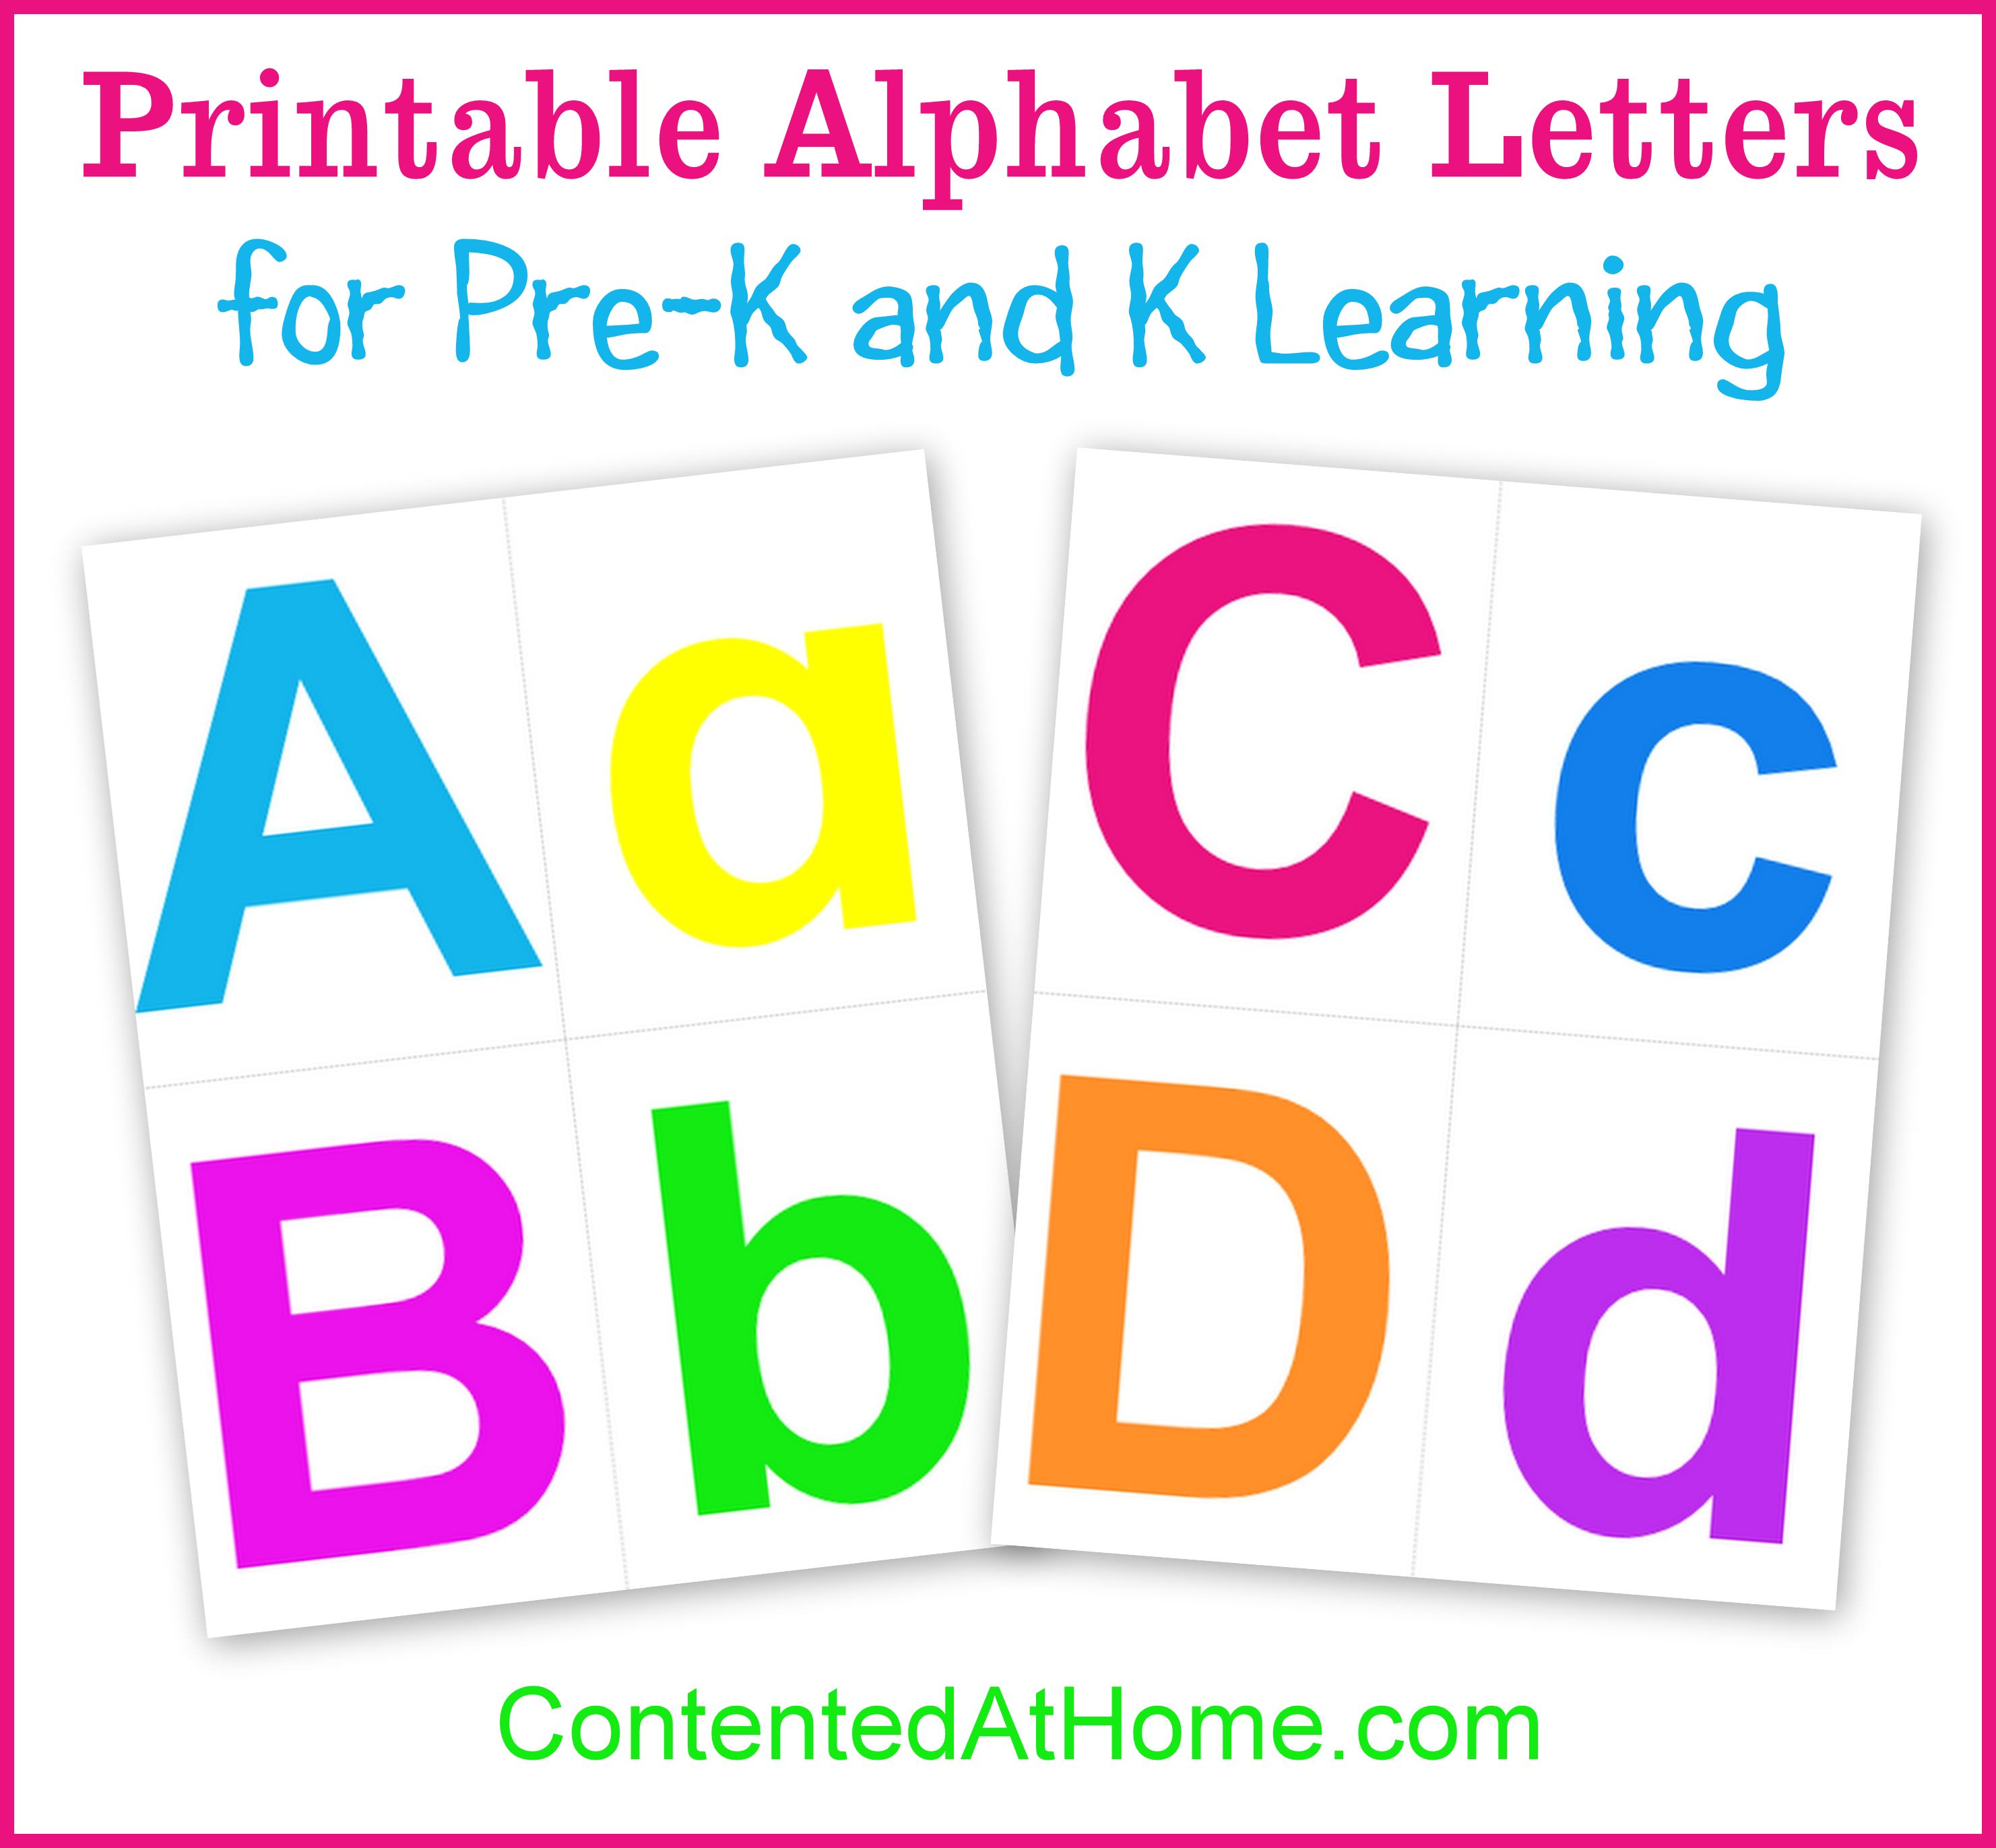 Printable Alphabet Letters Contented At Home